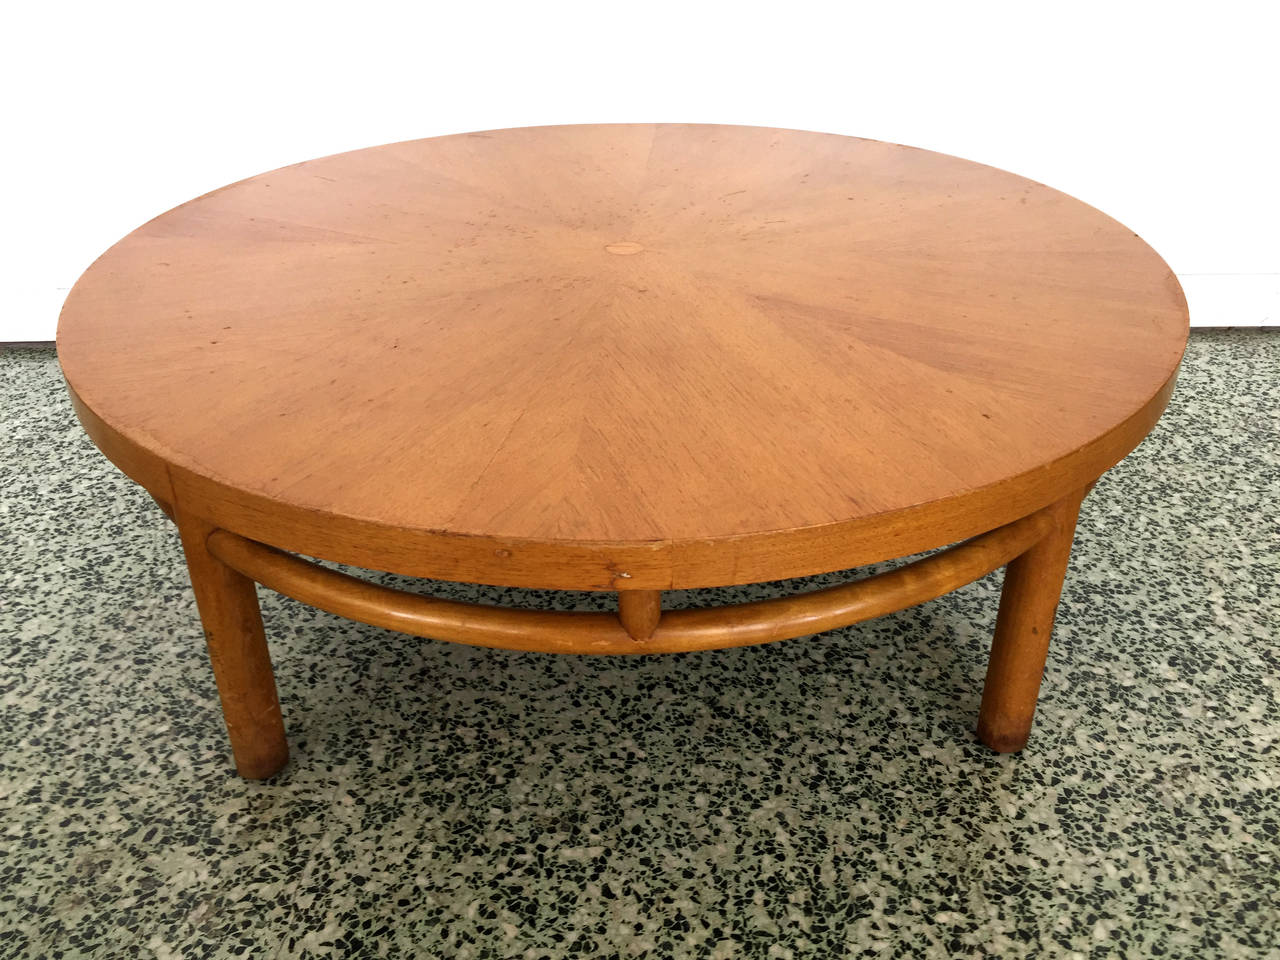 Walnut stain solid maple round coffee table with sound top, label under.